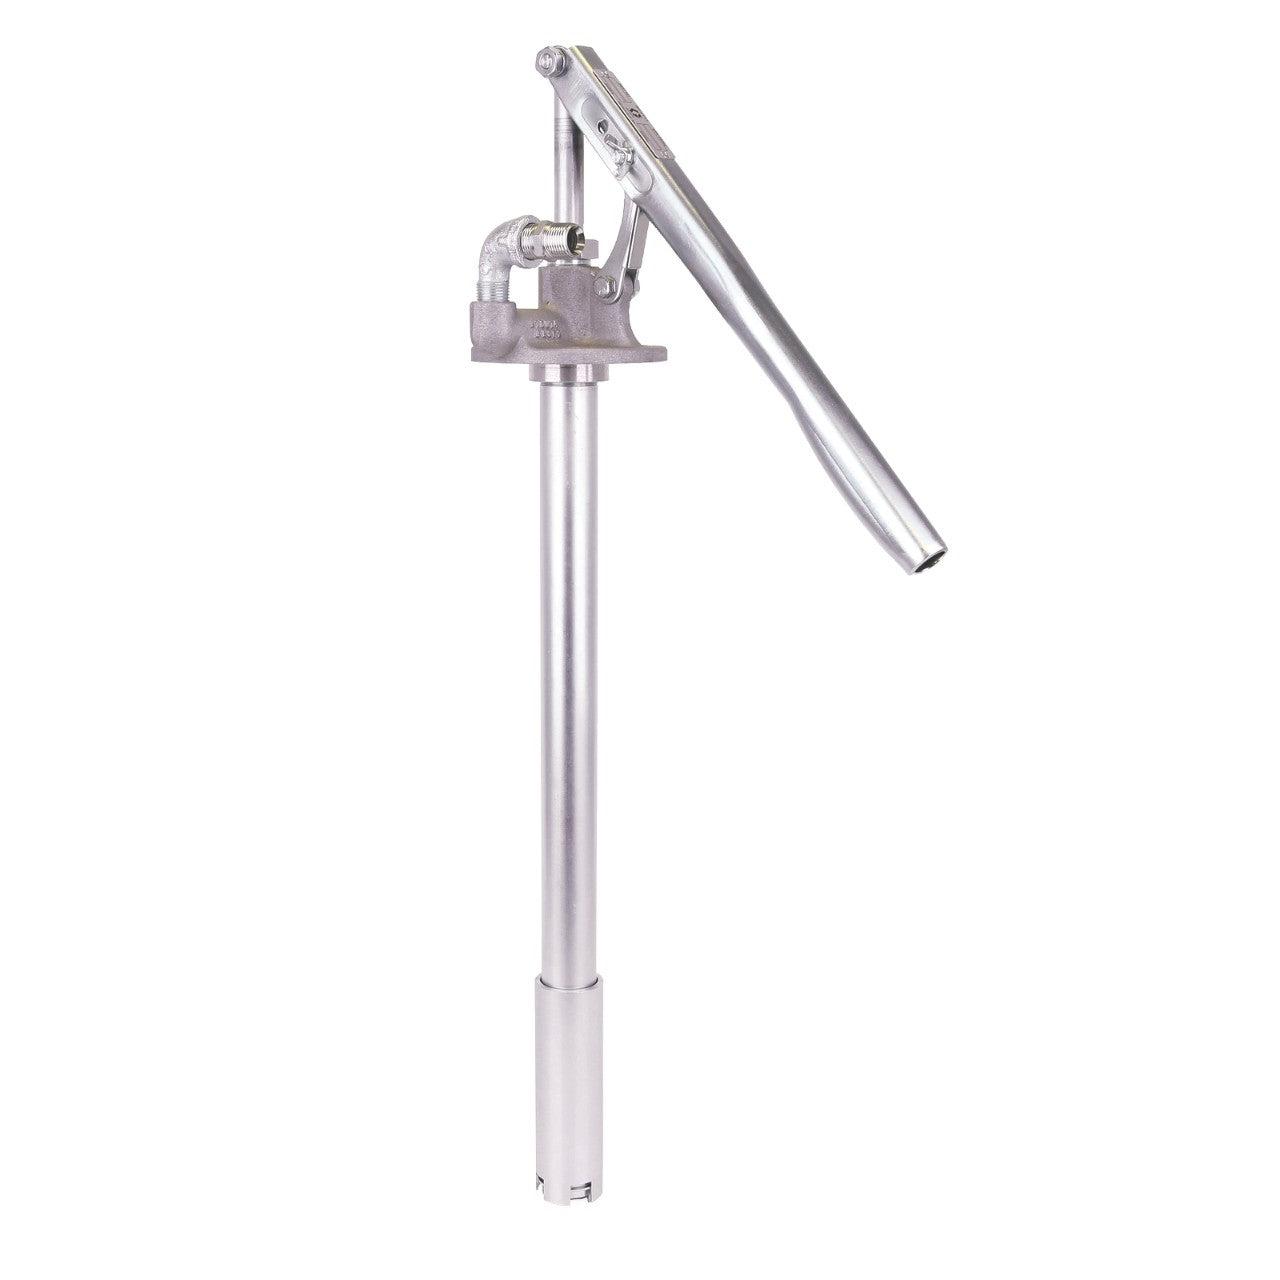 Hand-Operated, 120 lb (55 kg). Gear Lube Dispenser Hand Pump Assembly